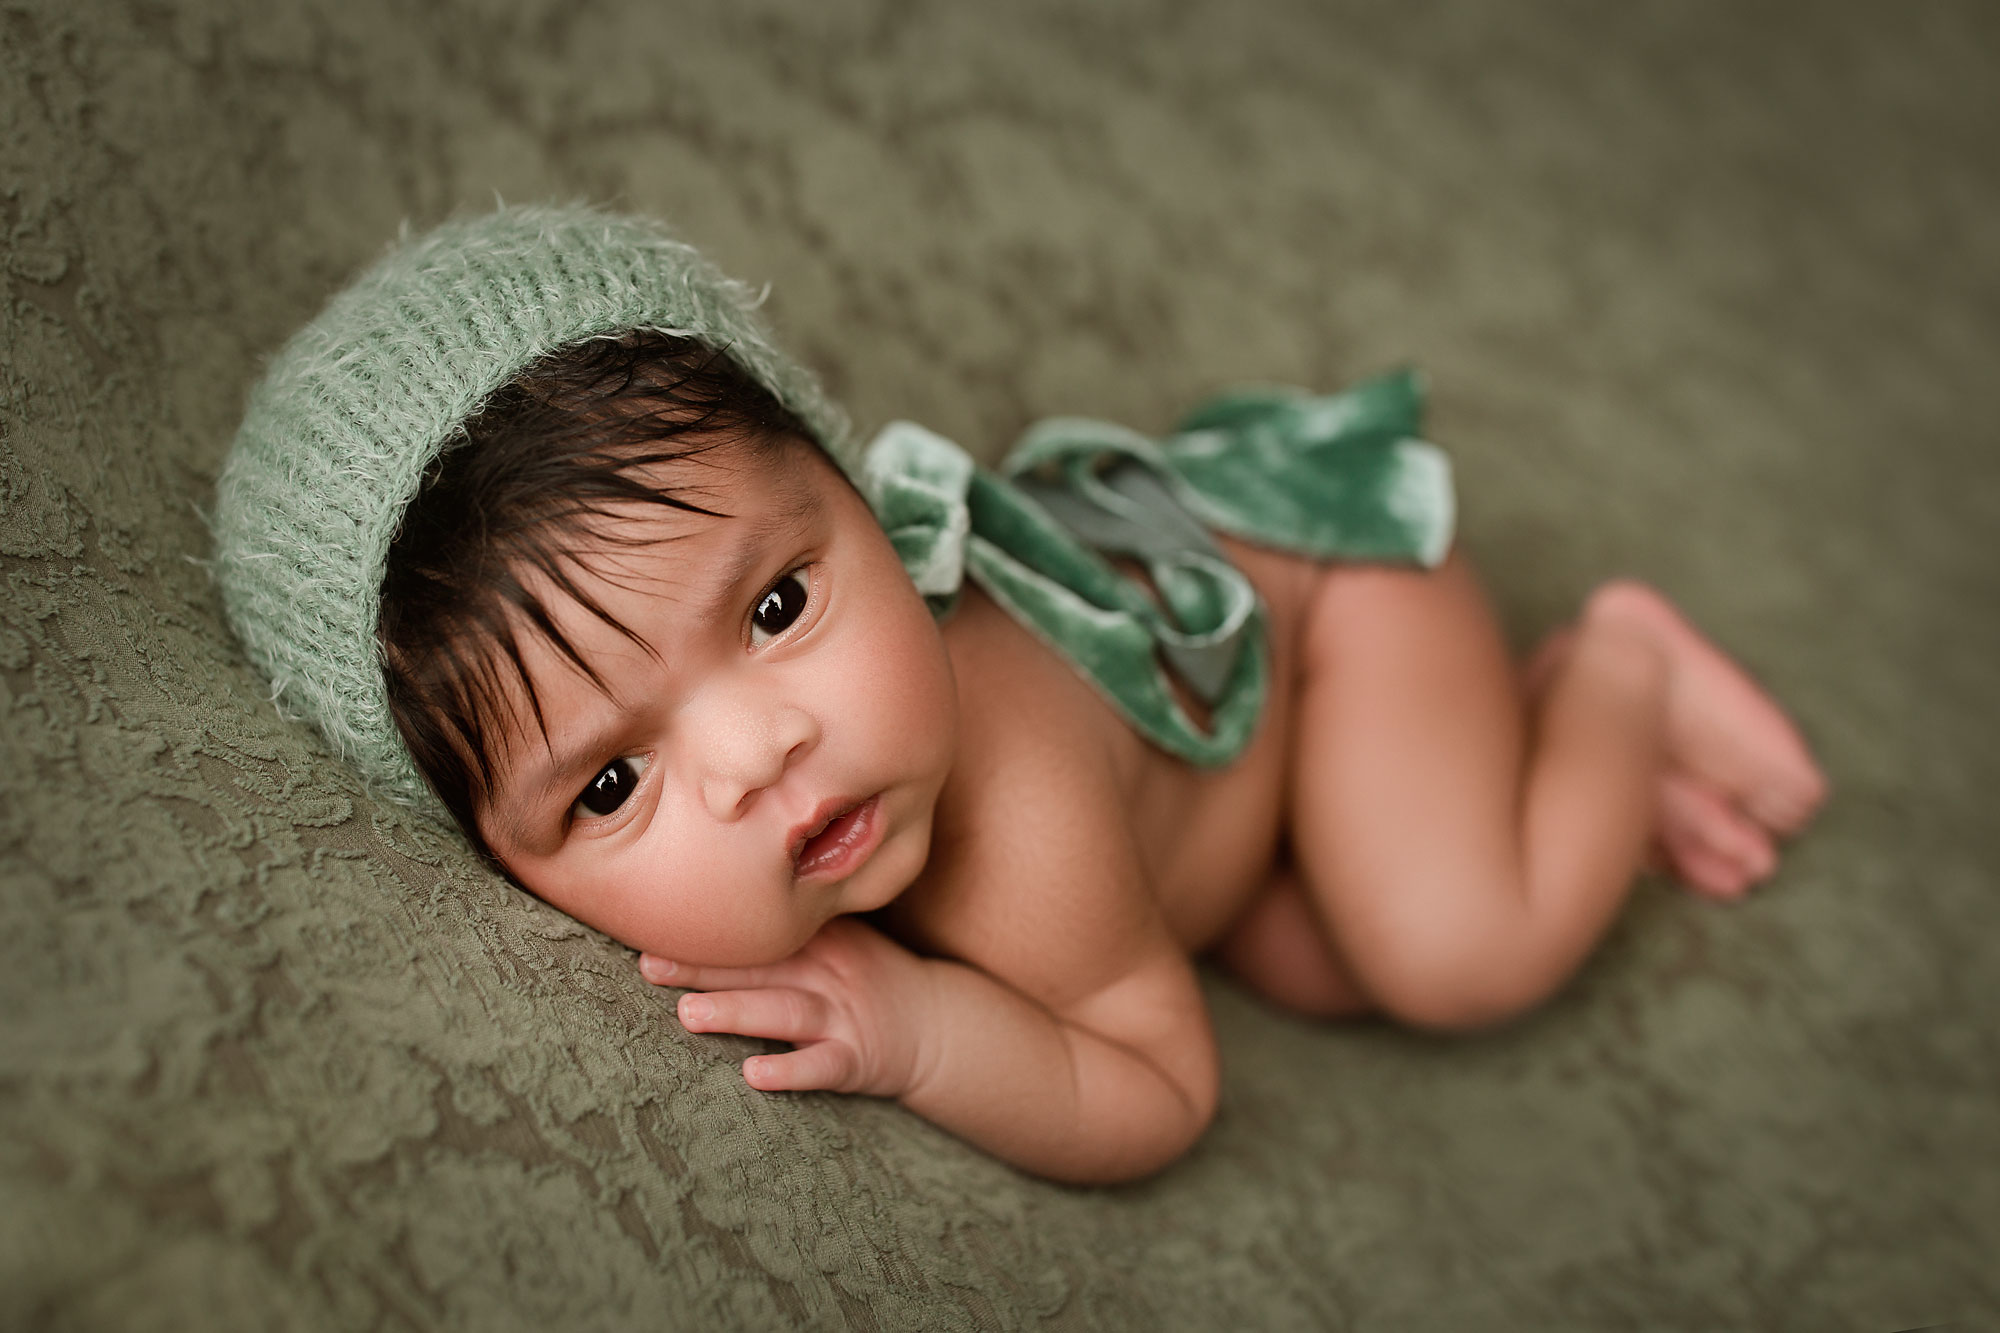 newborn photographer near me nj, wakeful baby looking at camera with green cap and ribbon